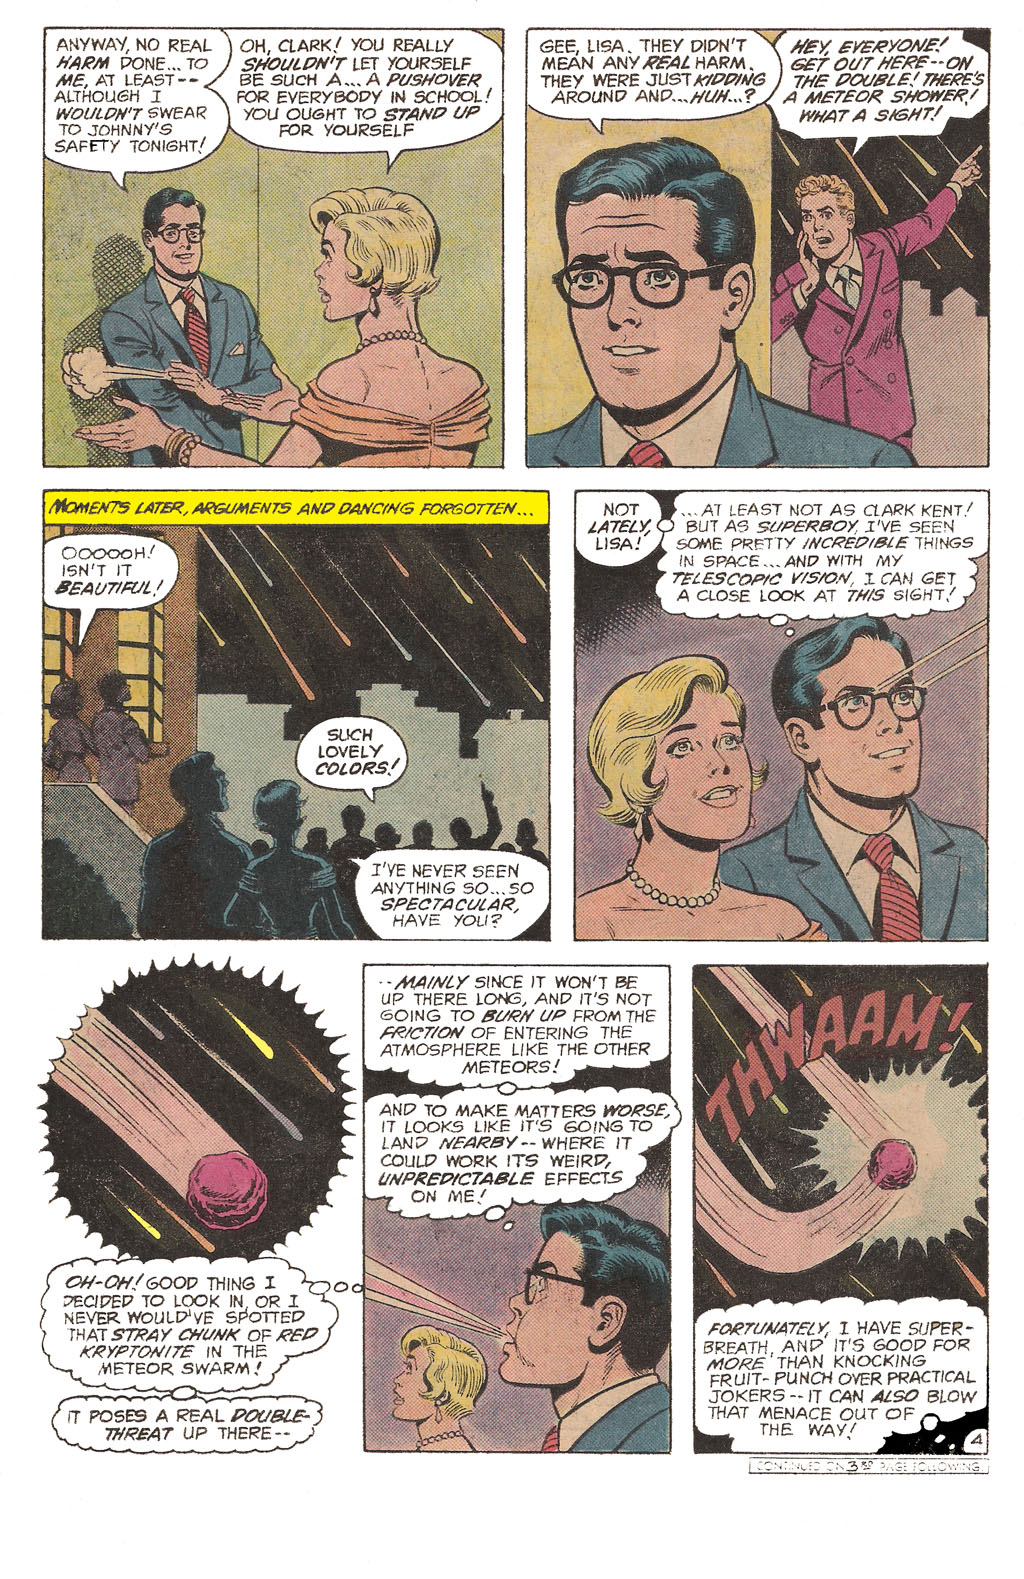 The New Adventures of Superboy 42 Page 4